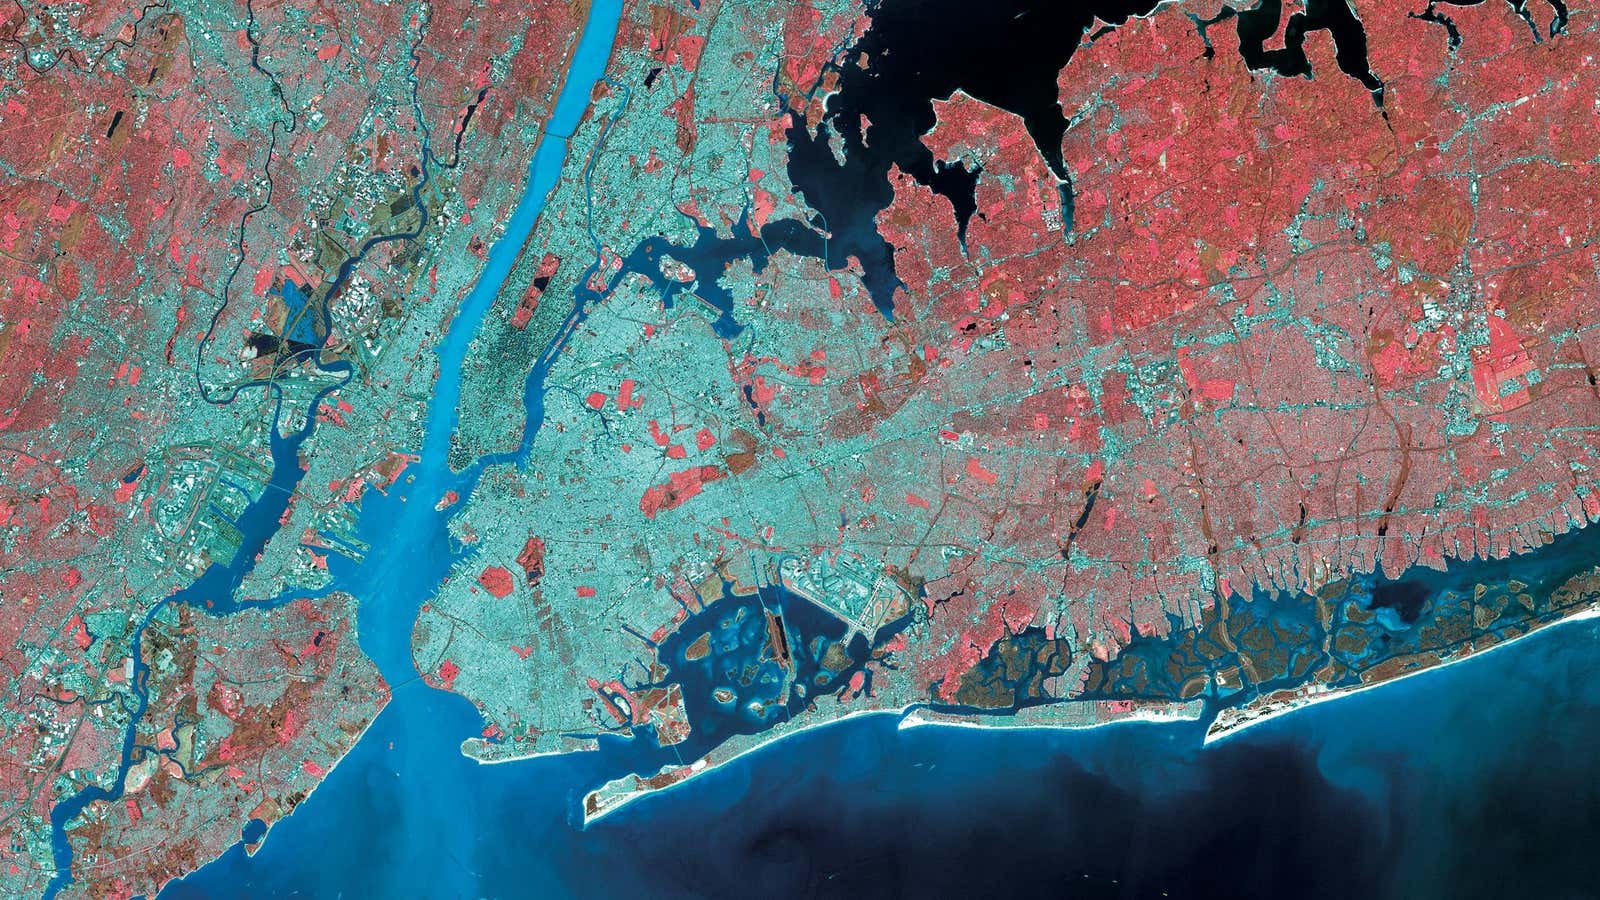 Manhattan’s dense grid is highlighted amid the wider city. The central island is fringed with piers down its west side, once serving as an entry point for the city’s many immigrants and industry hubs for the waterfront. Now, many of these piers are in disrepair or have been reclaimed as public spaces.